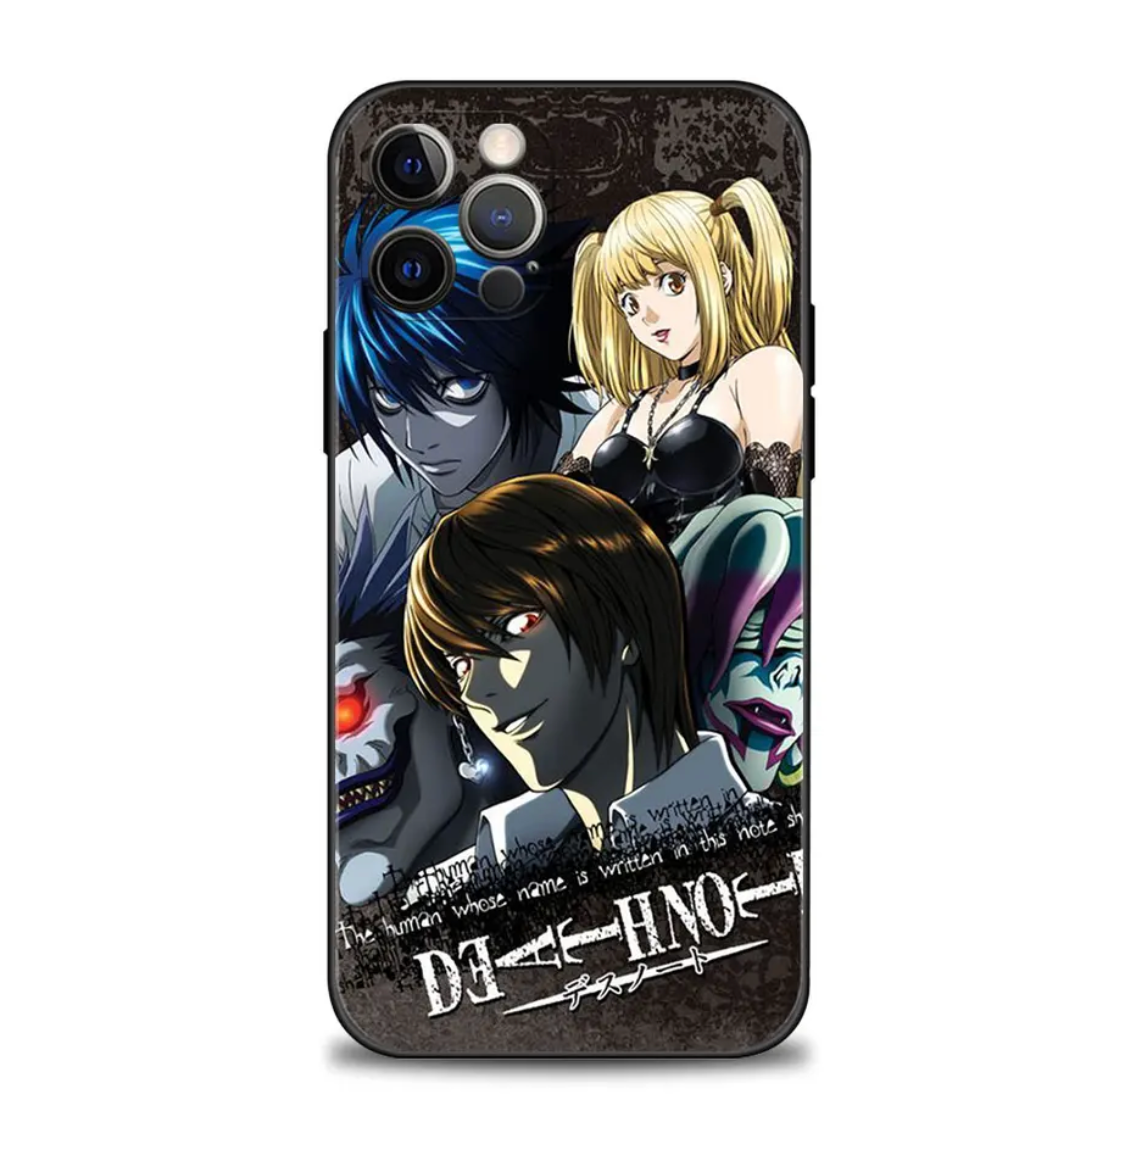 Death Note Phone Cases for IPhones